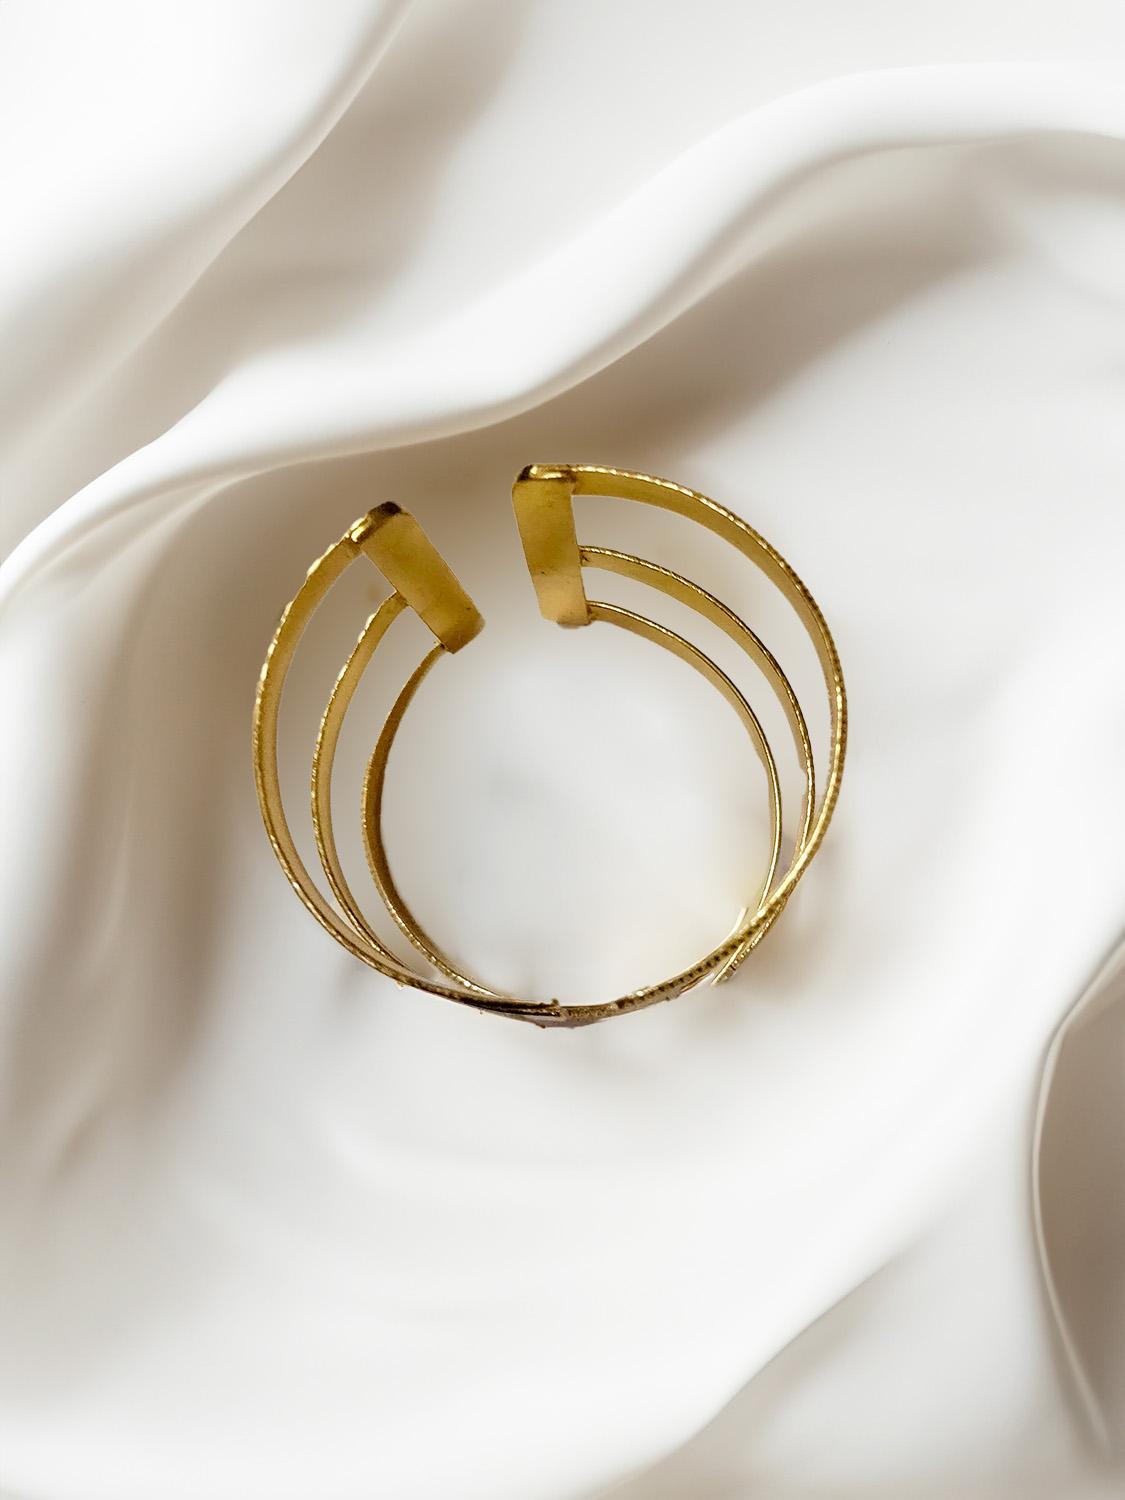 Gold Plated Handcuff Bracelet